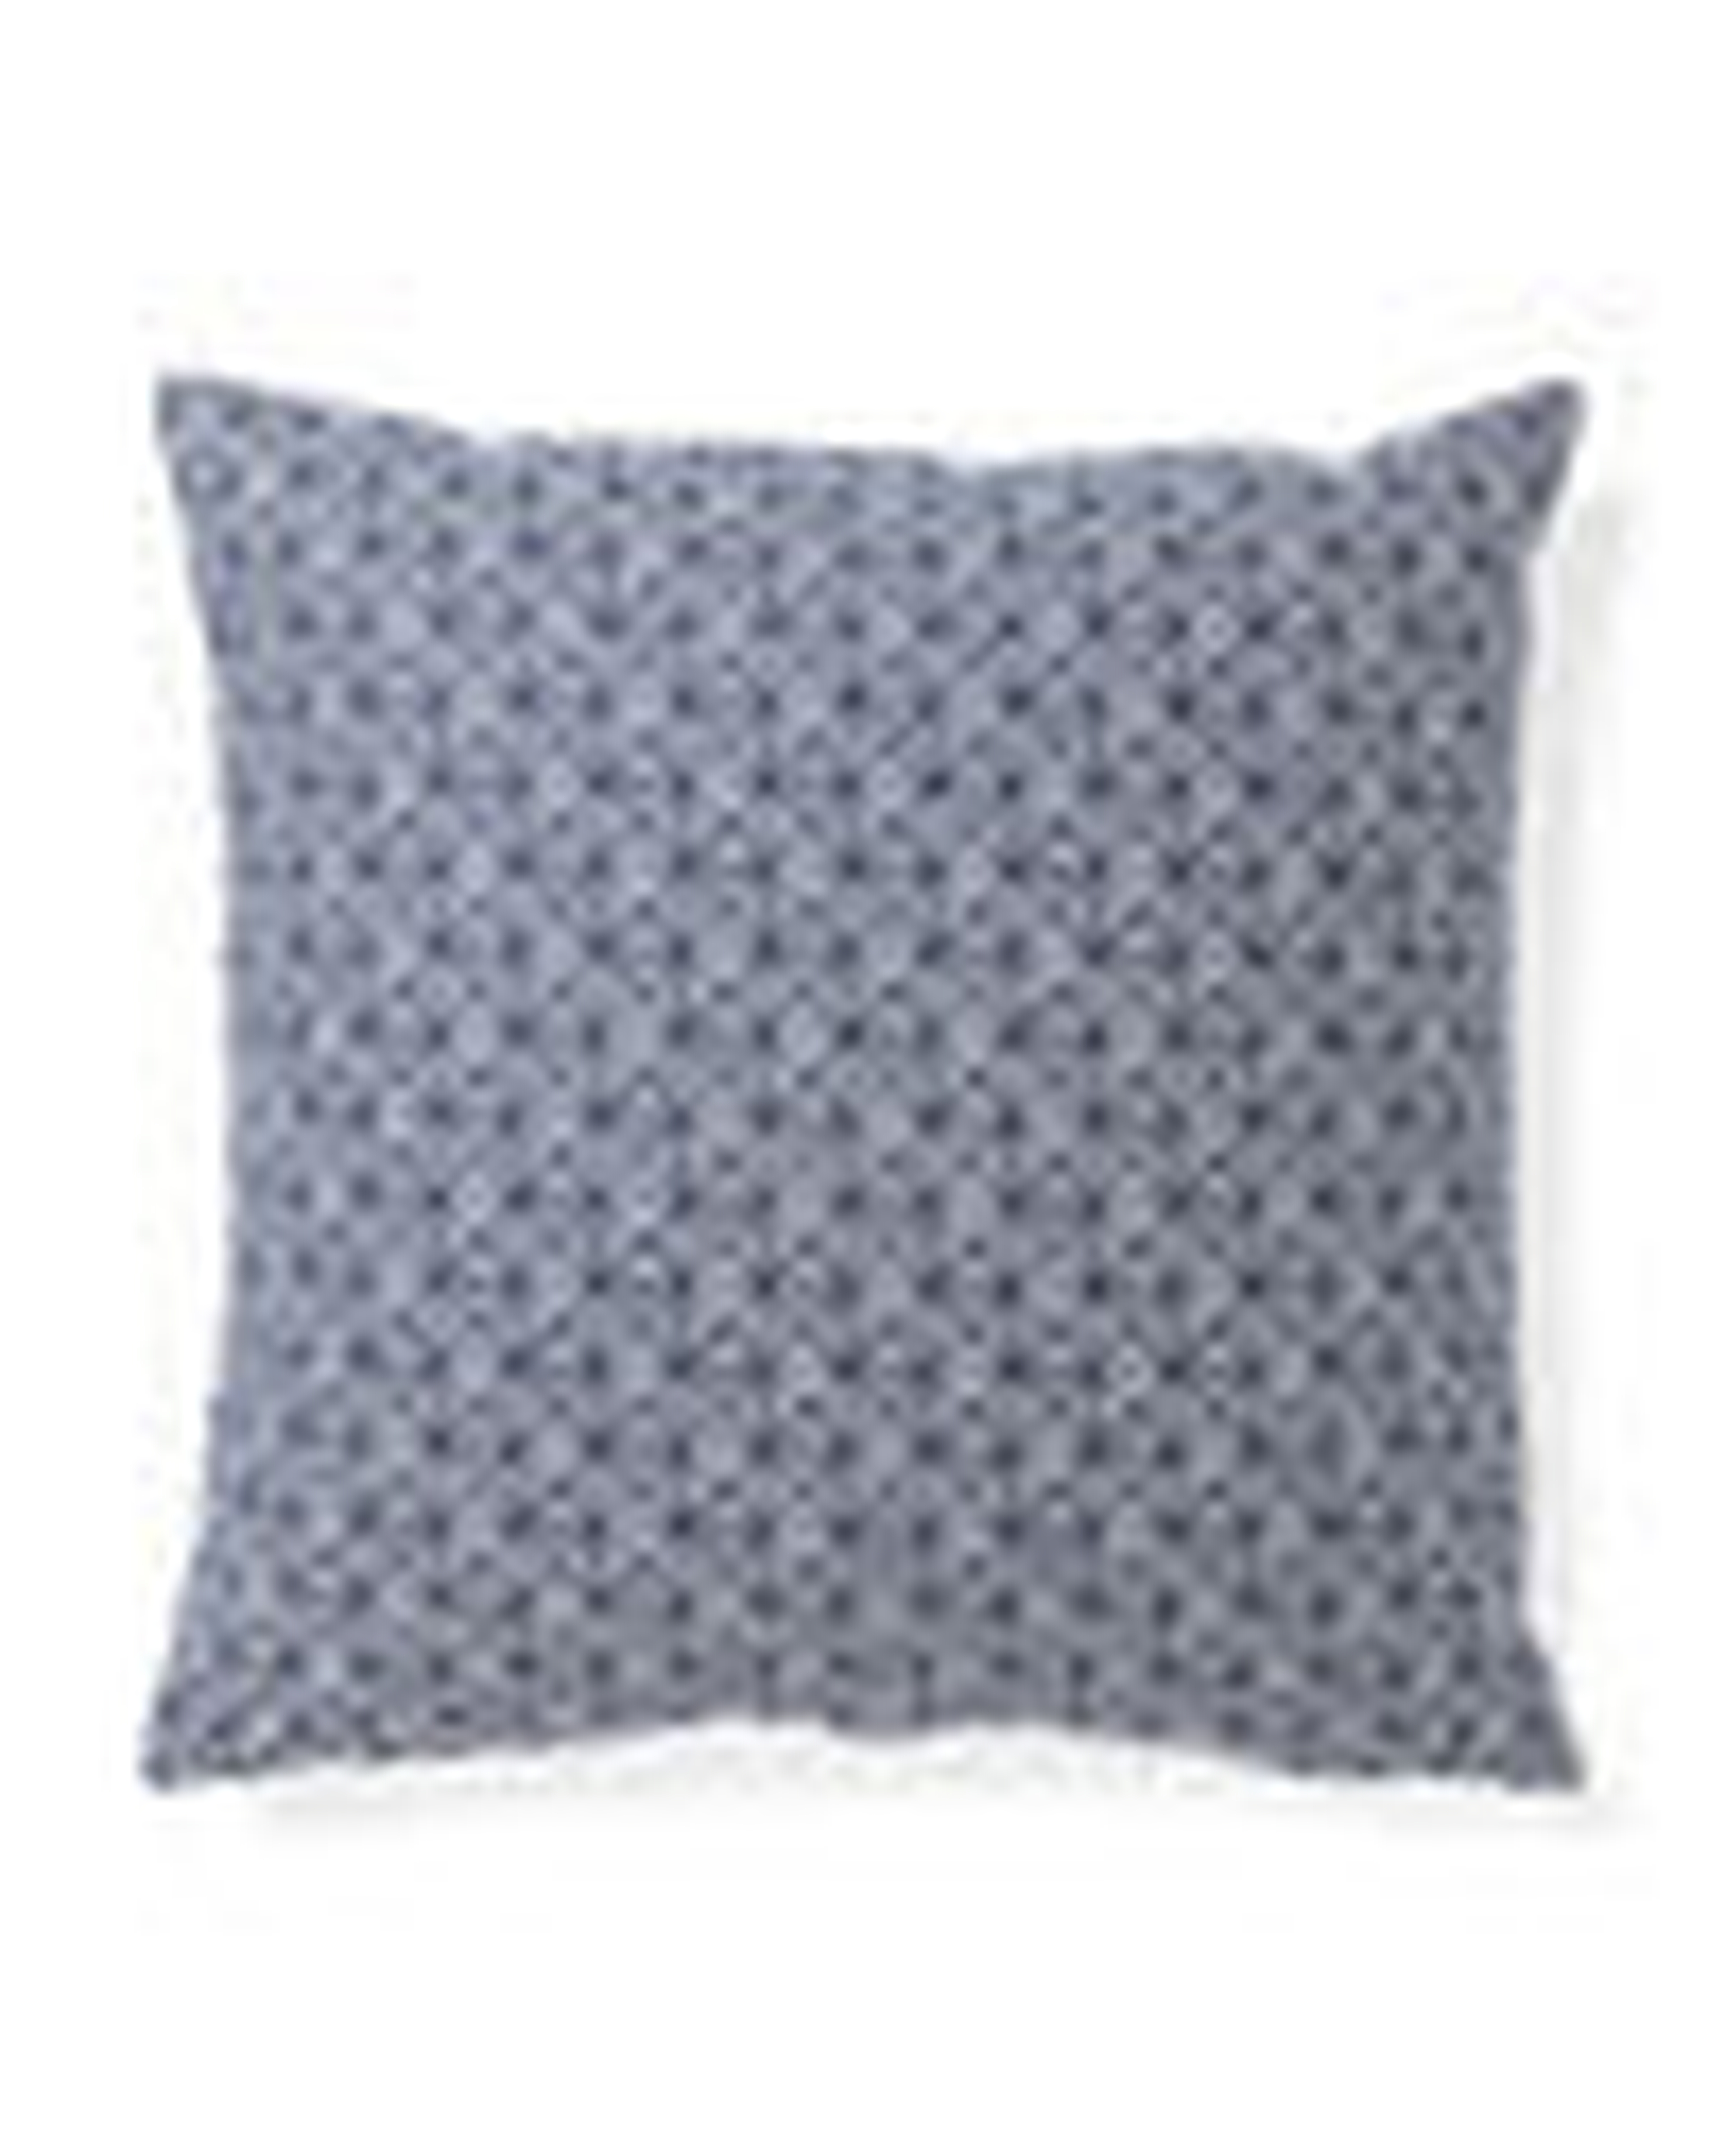 Origami Pillow Cover, Navy - 20" - Inserts sold separately - Serena and Lily